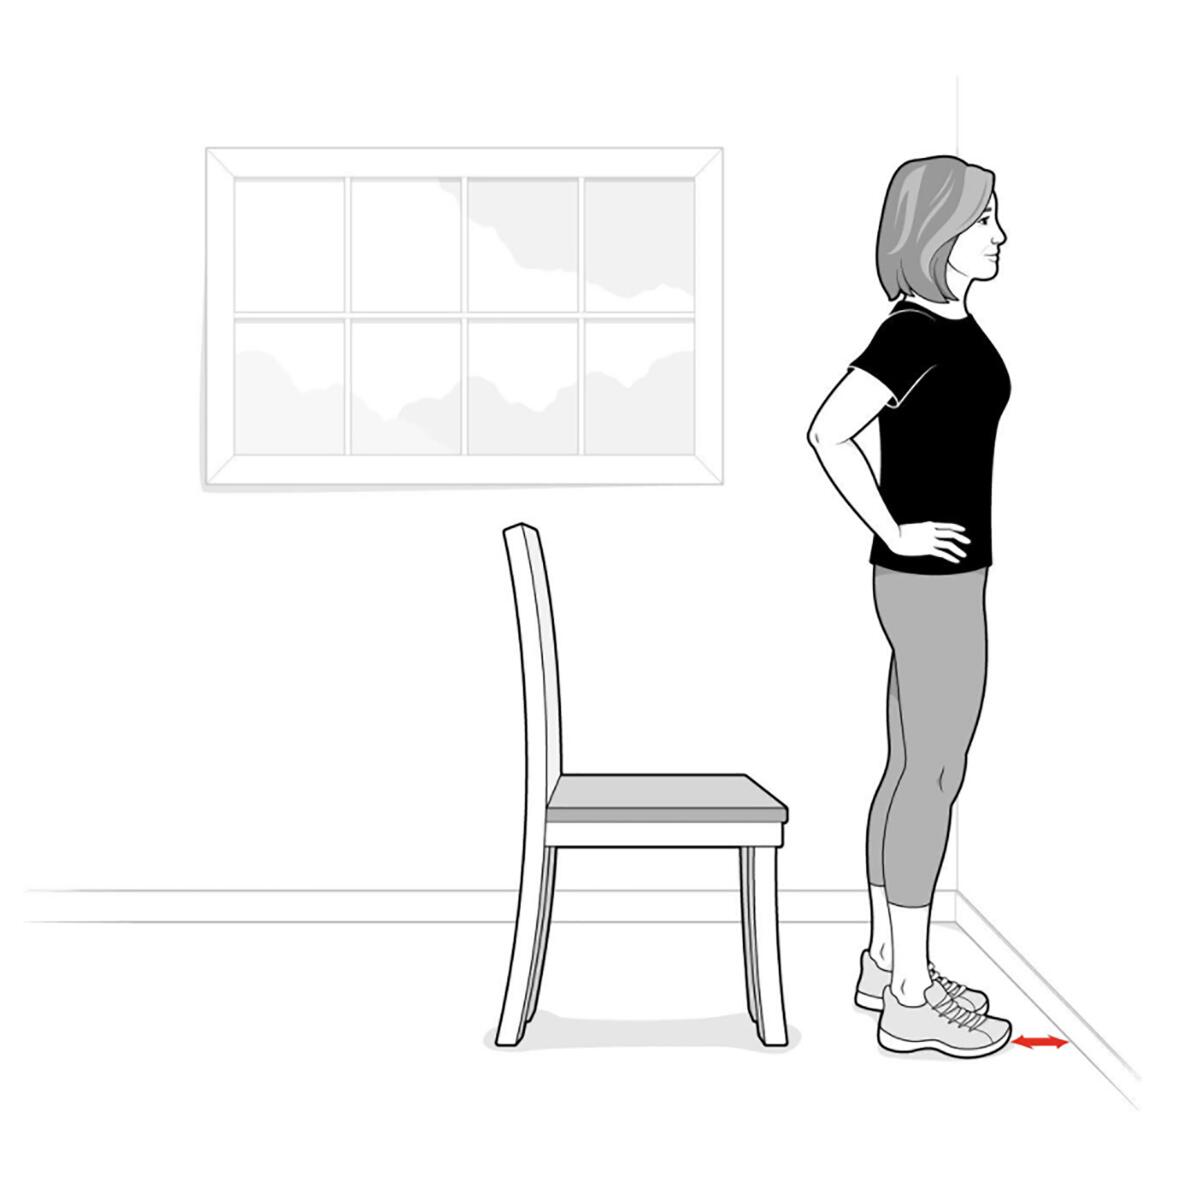 A sketch shows a woman standing in front of chair, about 4 inches from the wall.